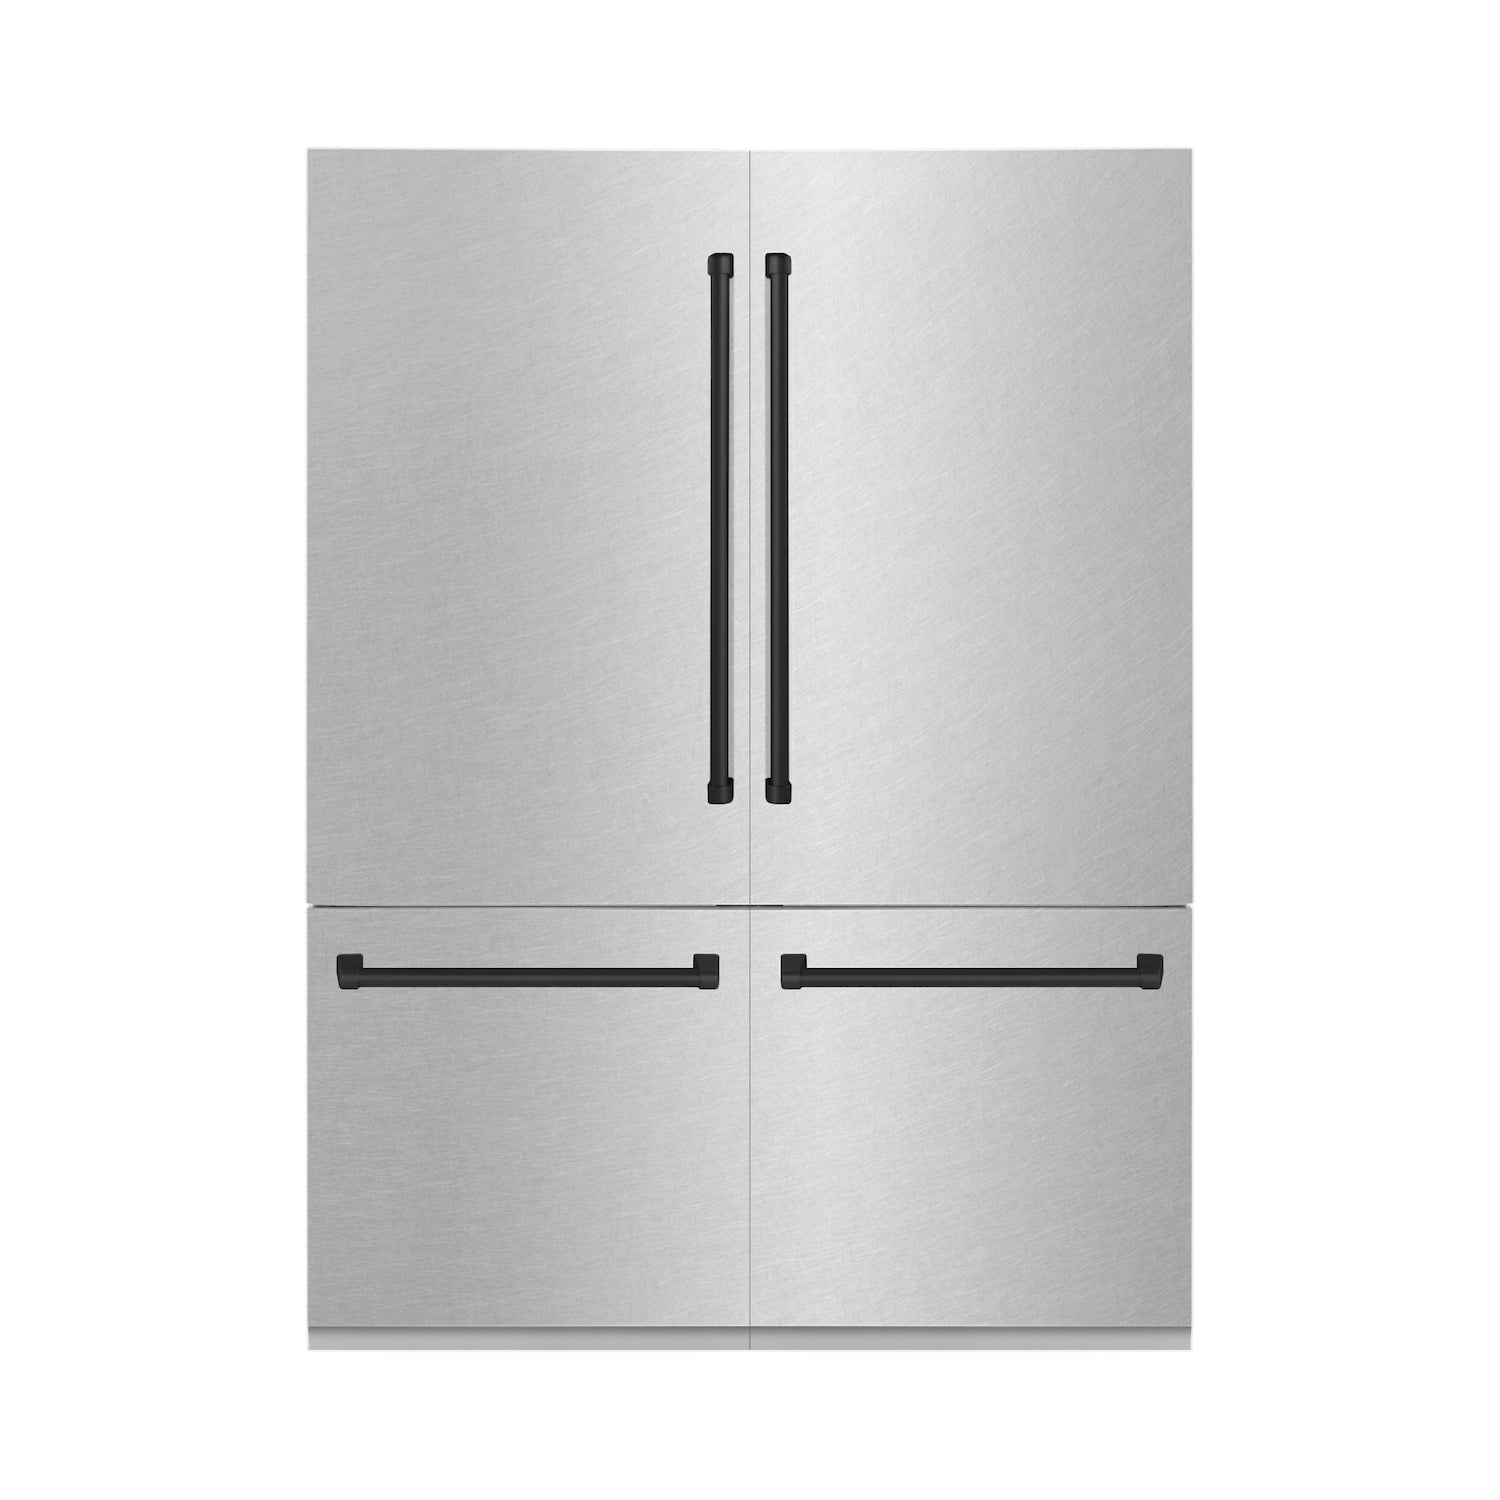 ZLINE Autograph Edition 60" Built-in French Door Refrigerator with DuraSnow Stainless Steel panels and Matte Black accents front.